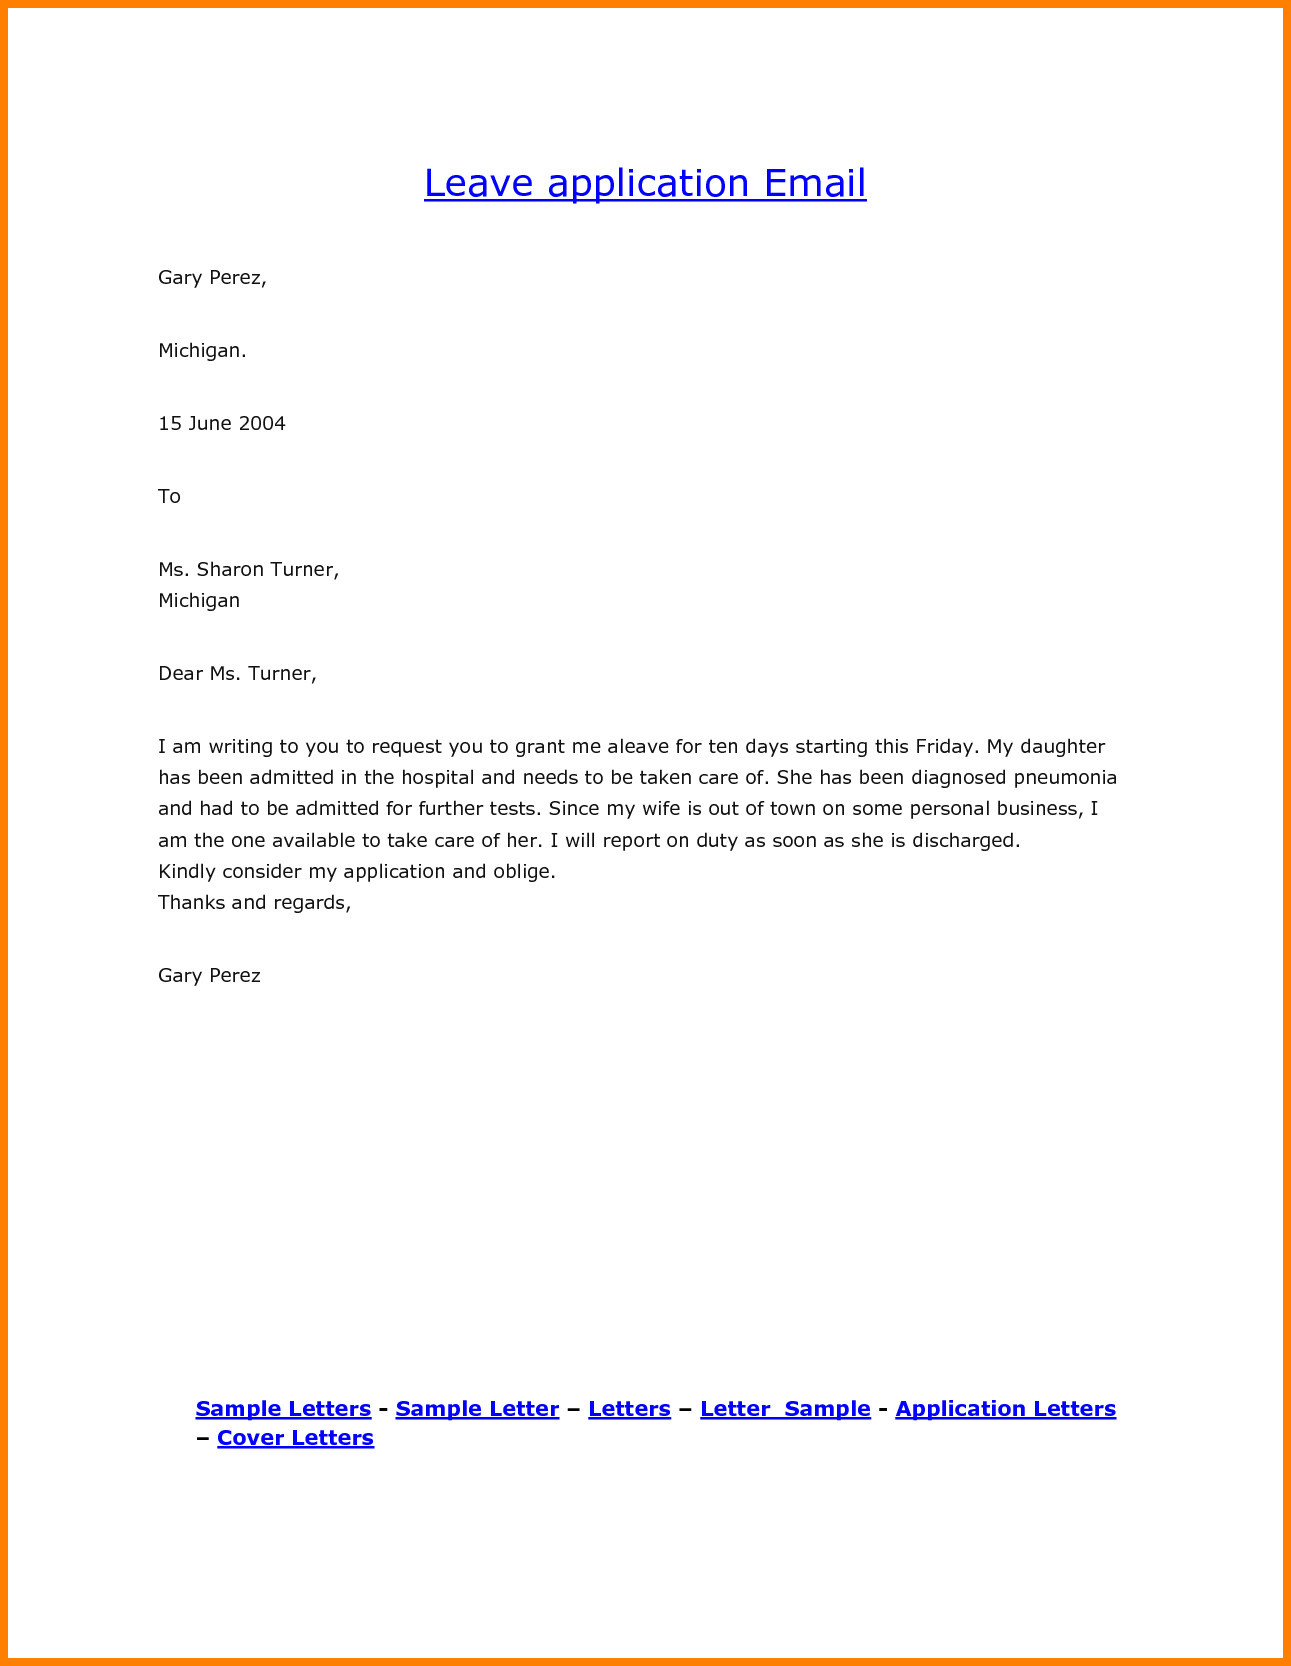 Leave Request Email Sample